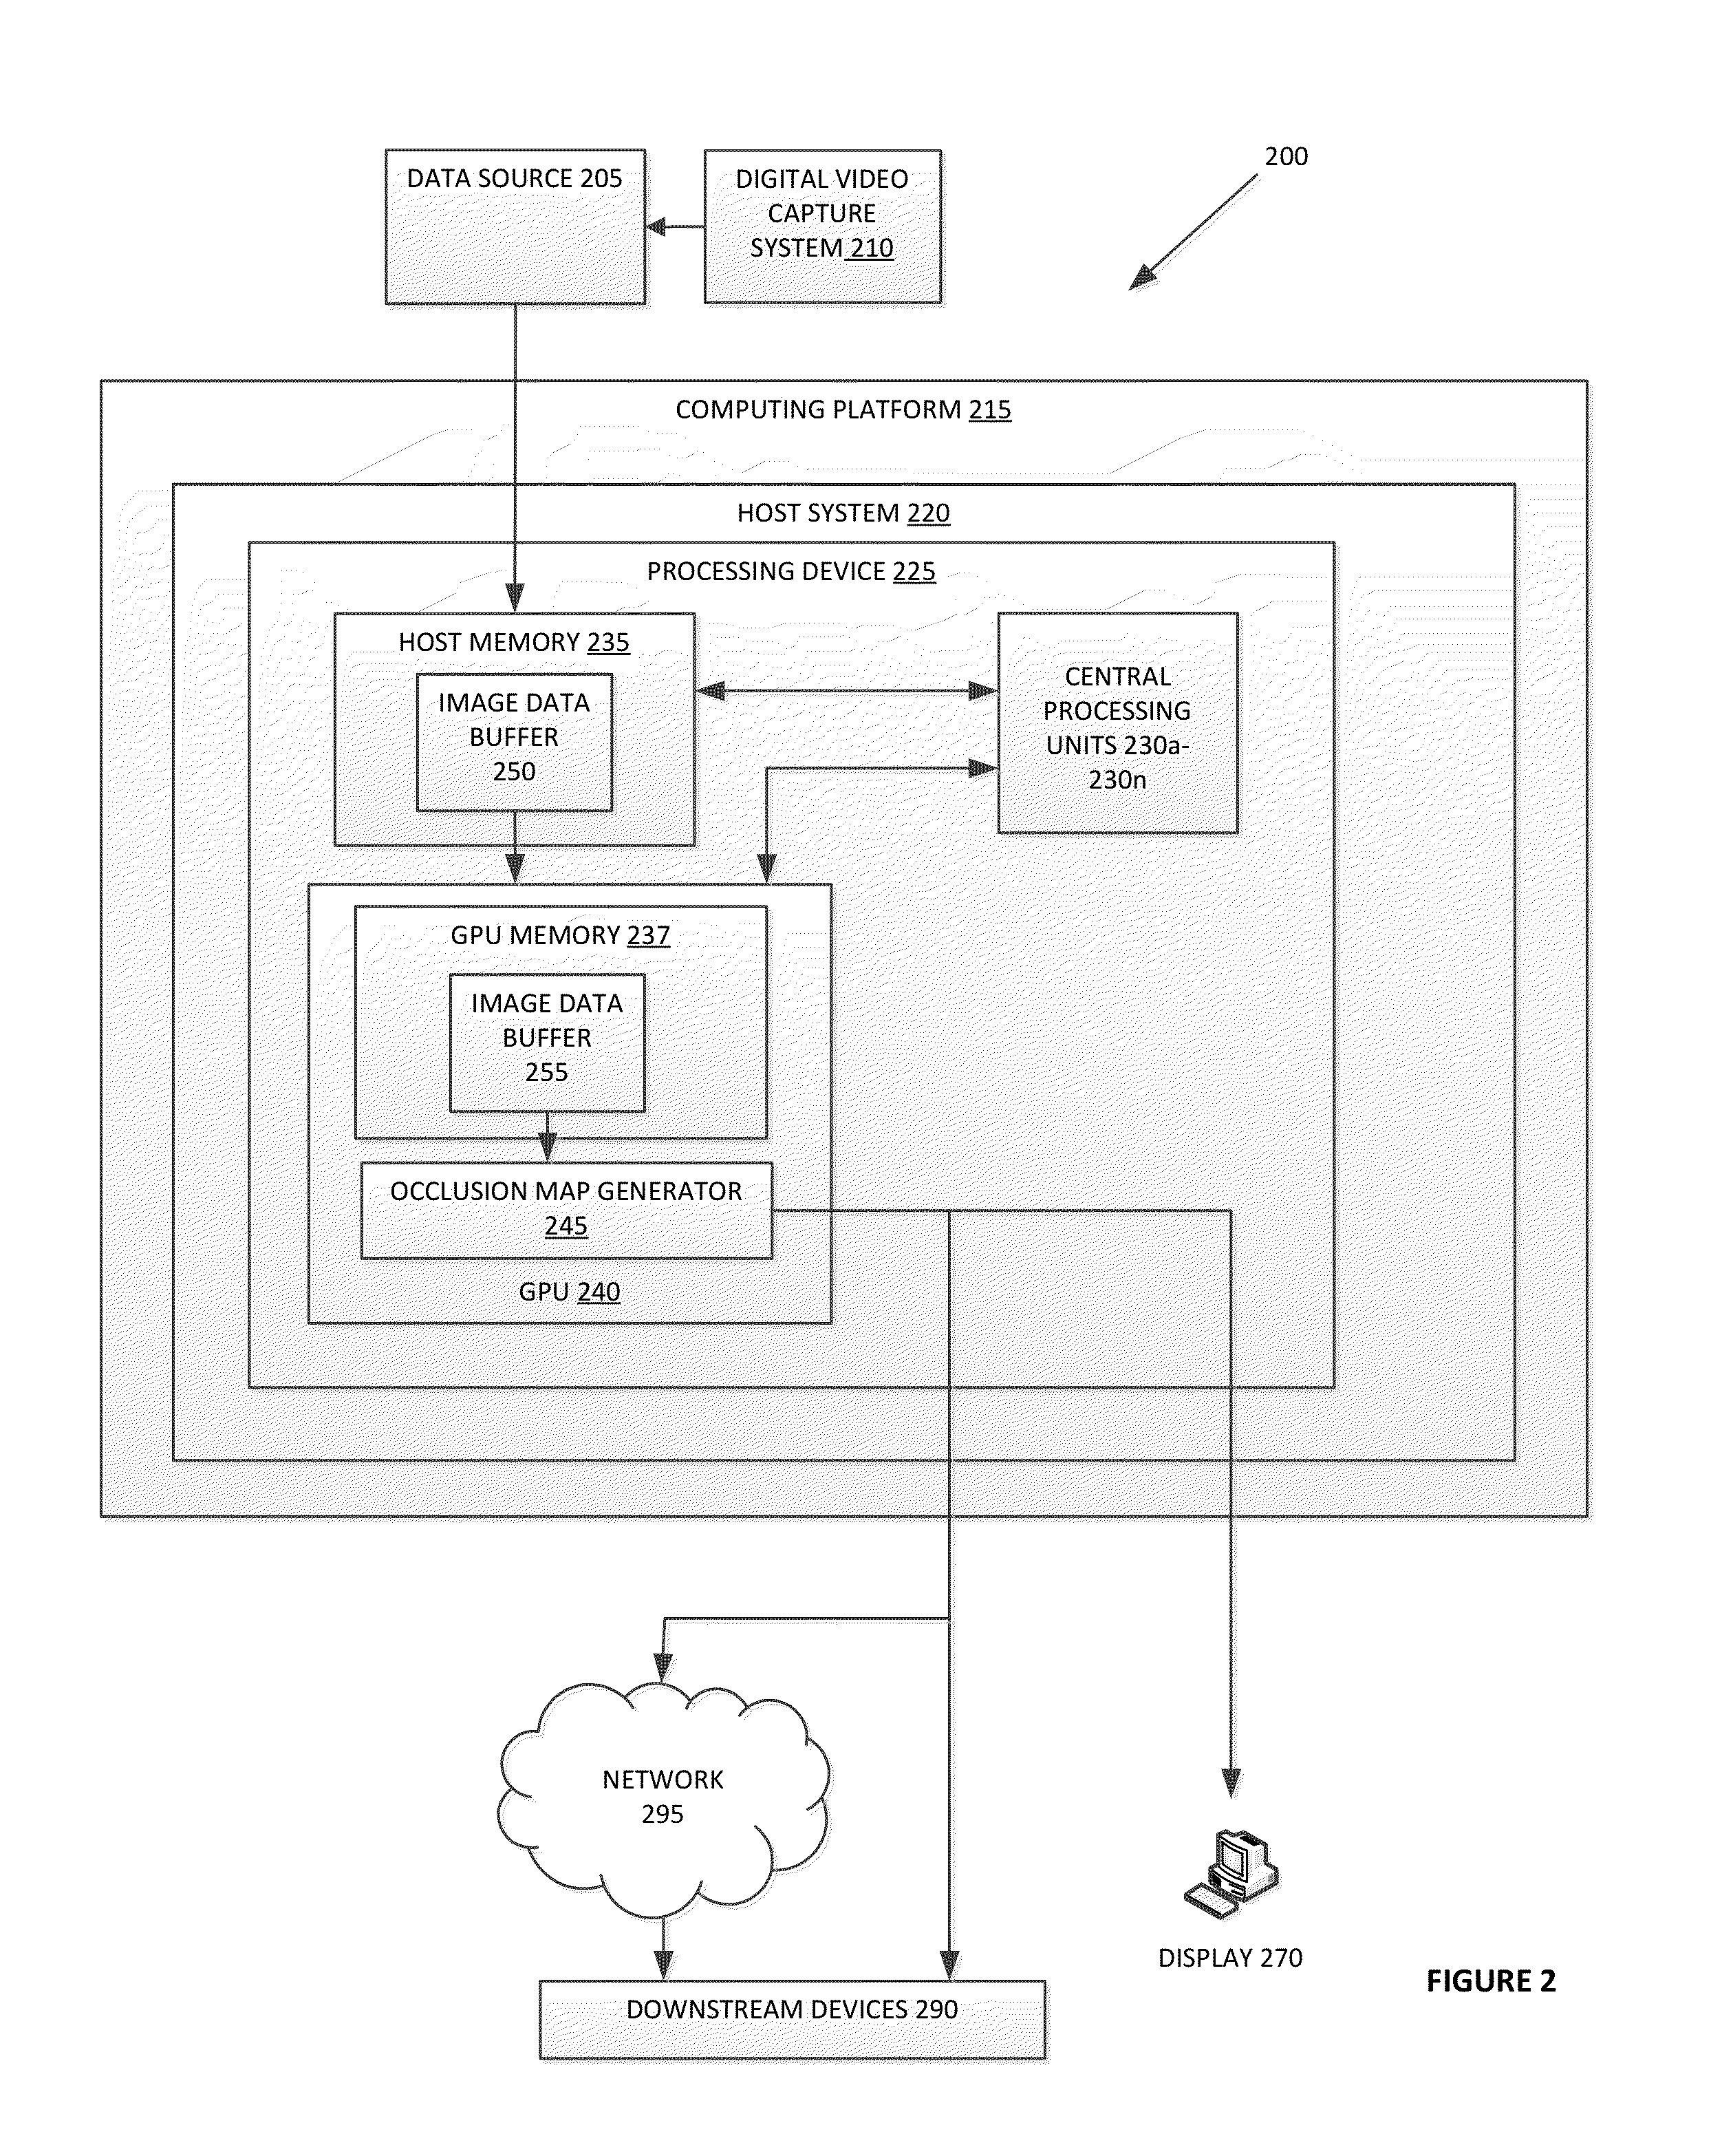 Digital processing method and system for determination of object occlusion in an image sequence